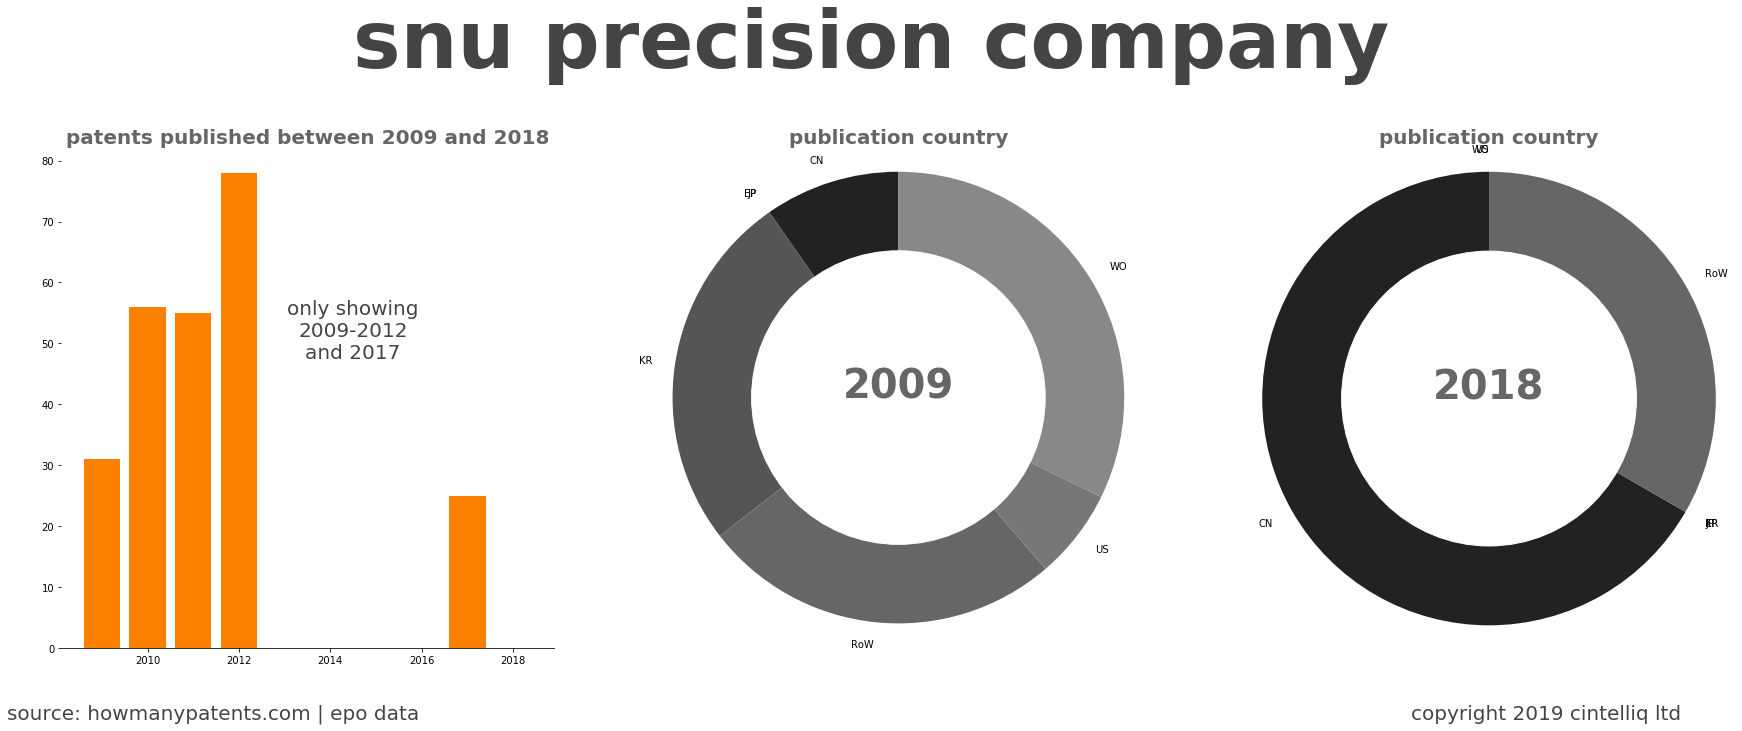 summary of patents for Snu Precision Company